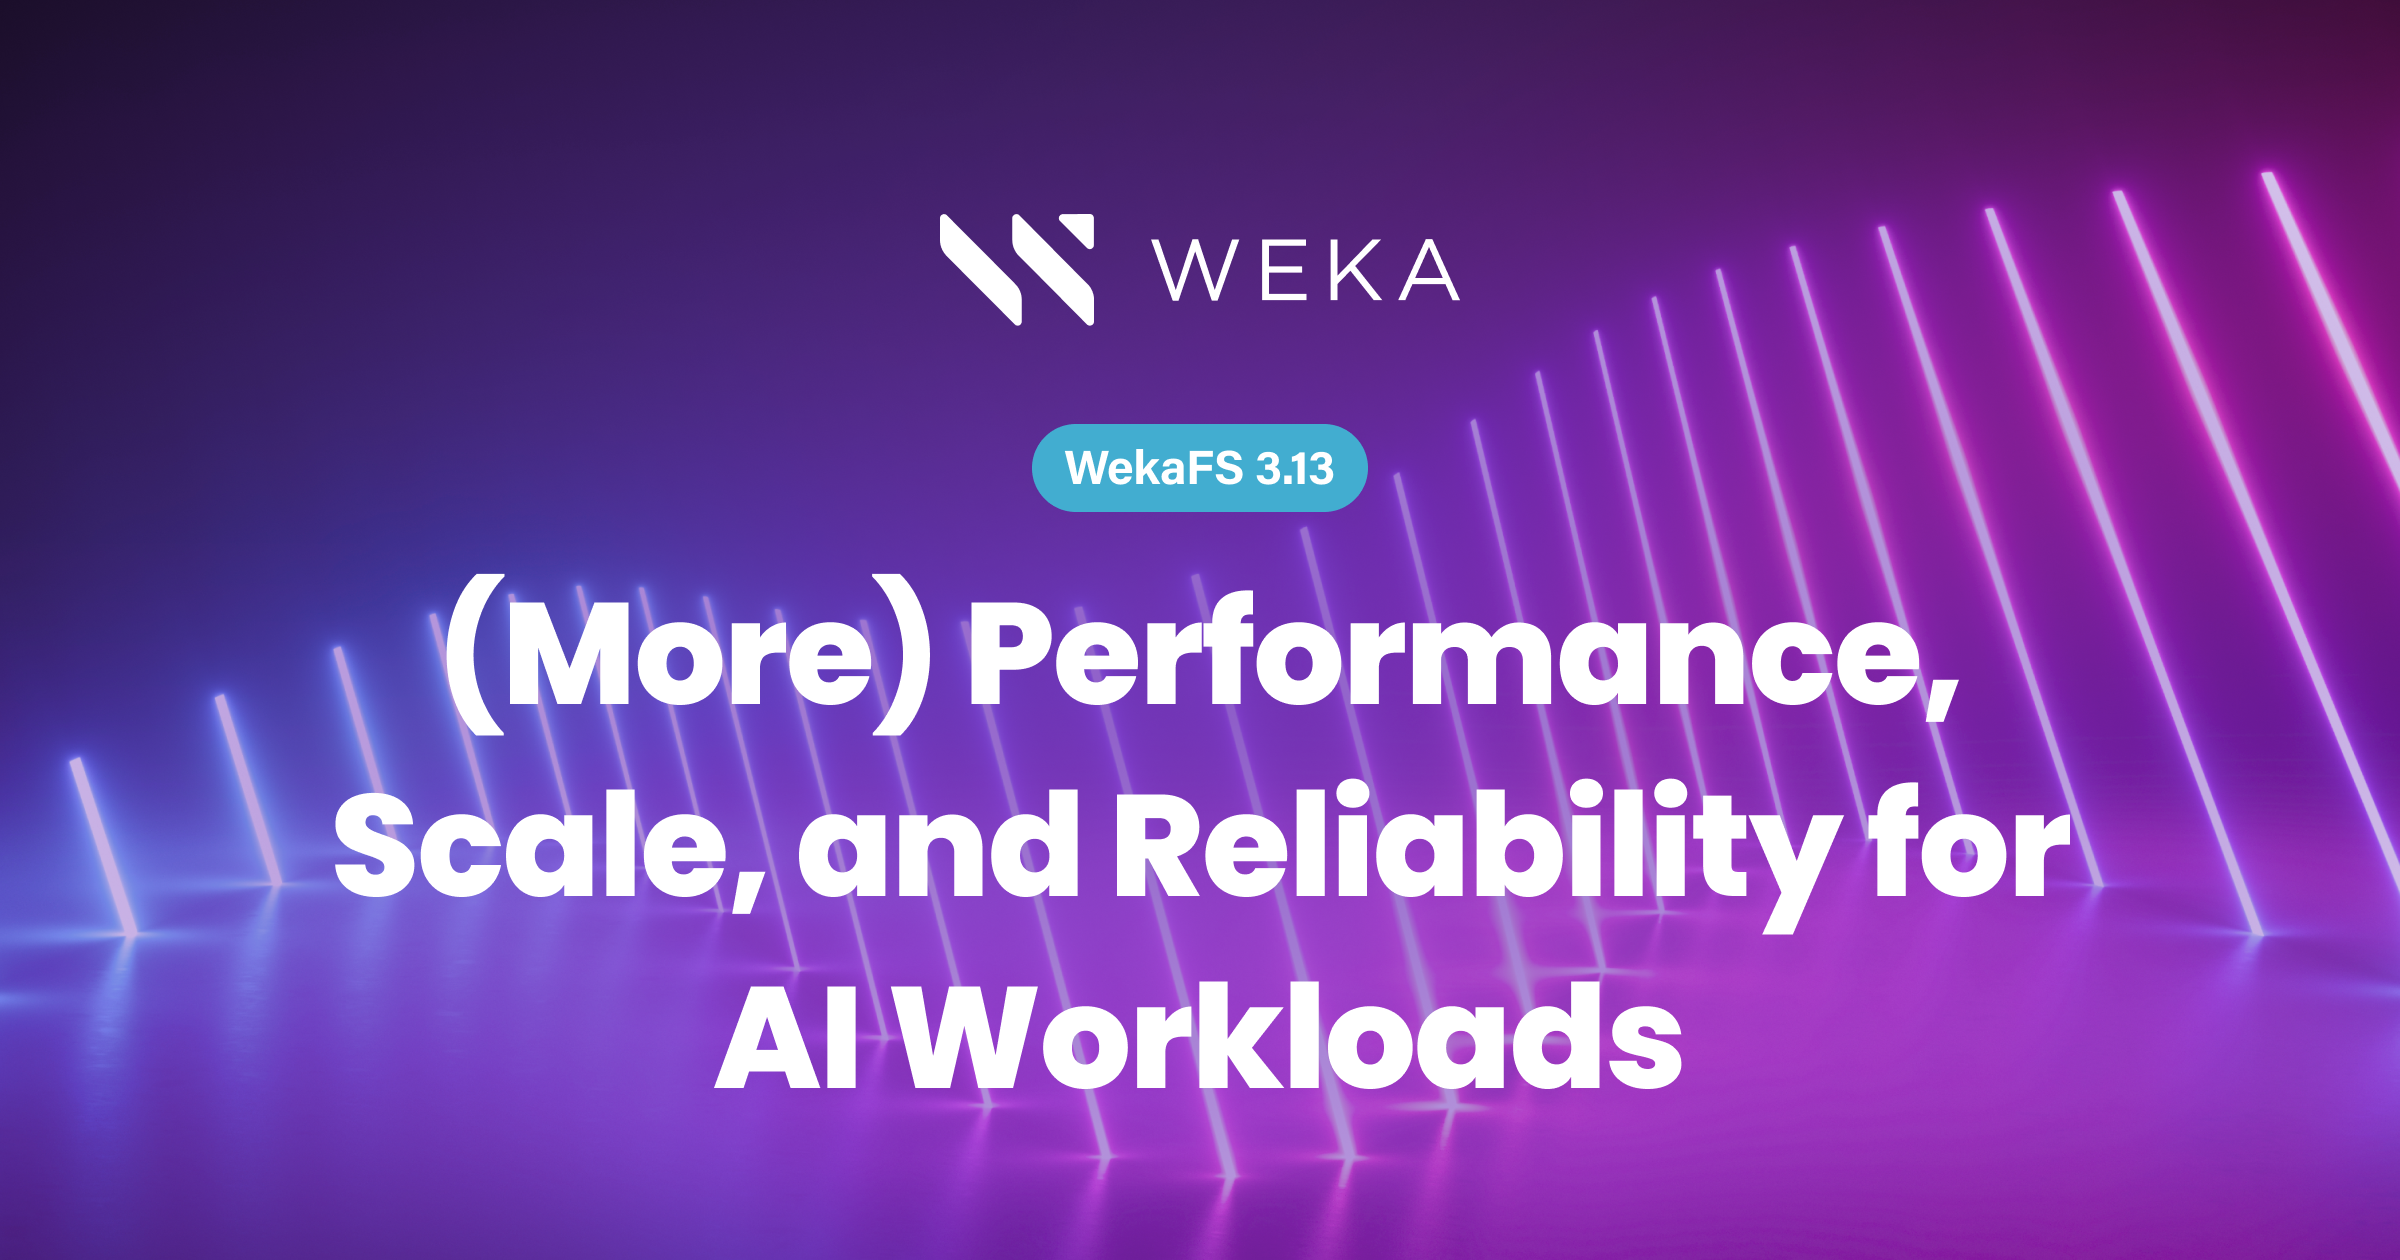 (More) Performance, Scale, and Reliability for AI Workloads